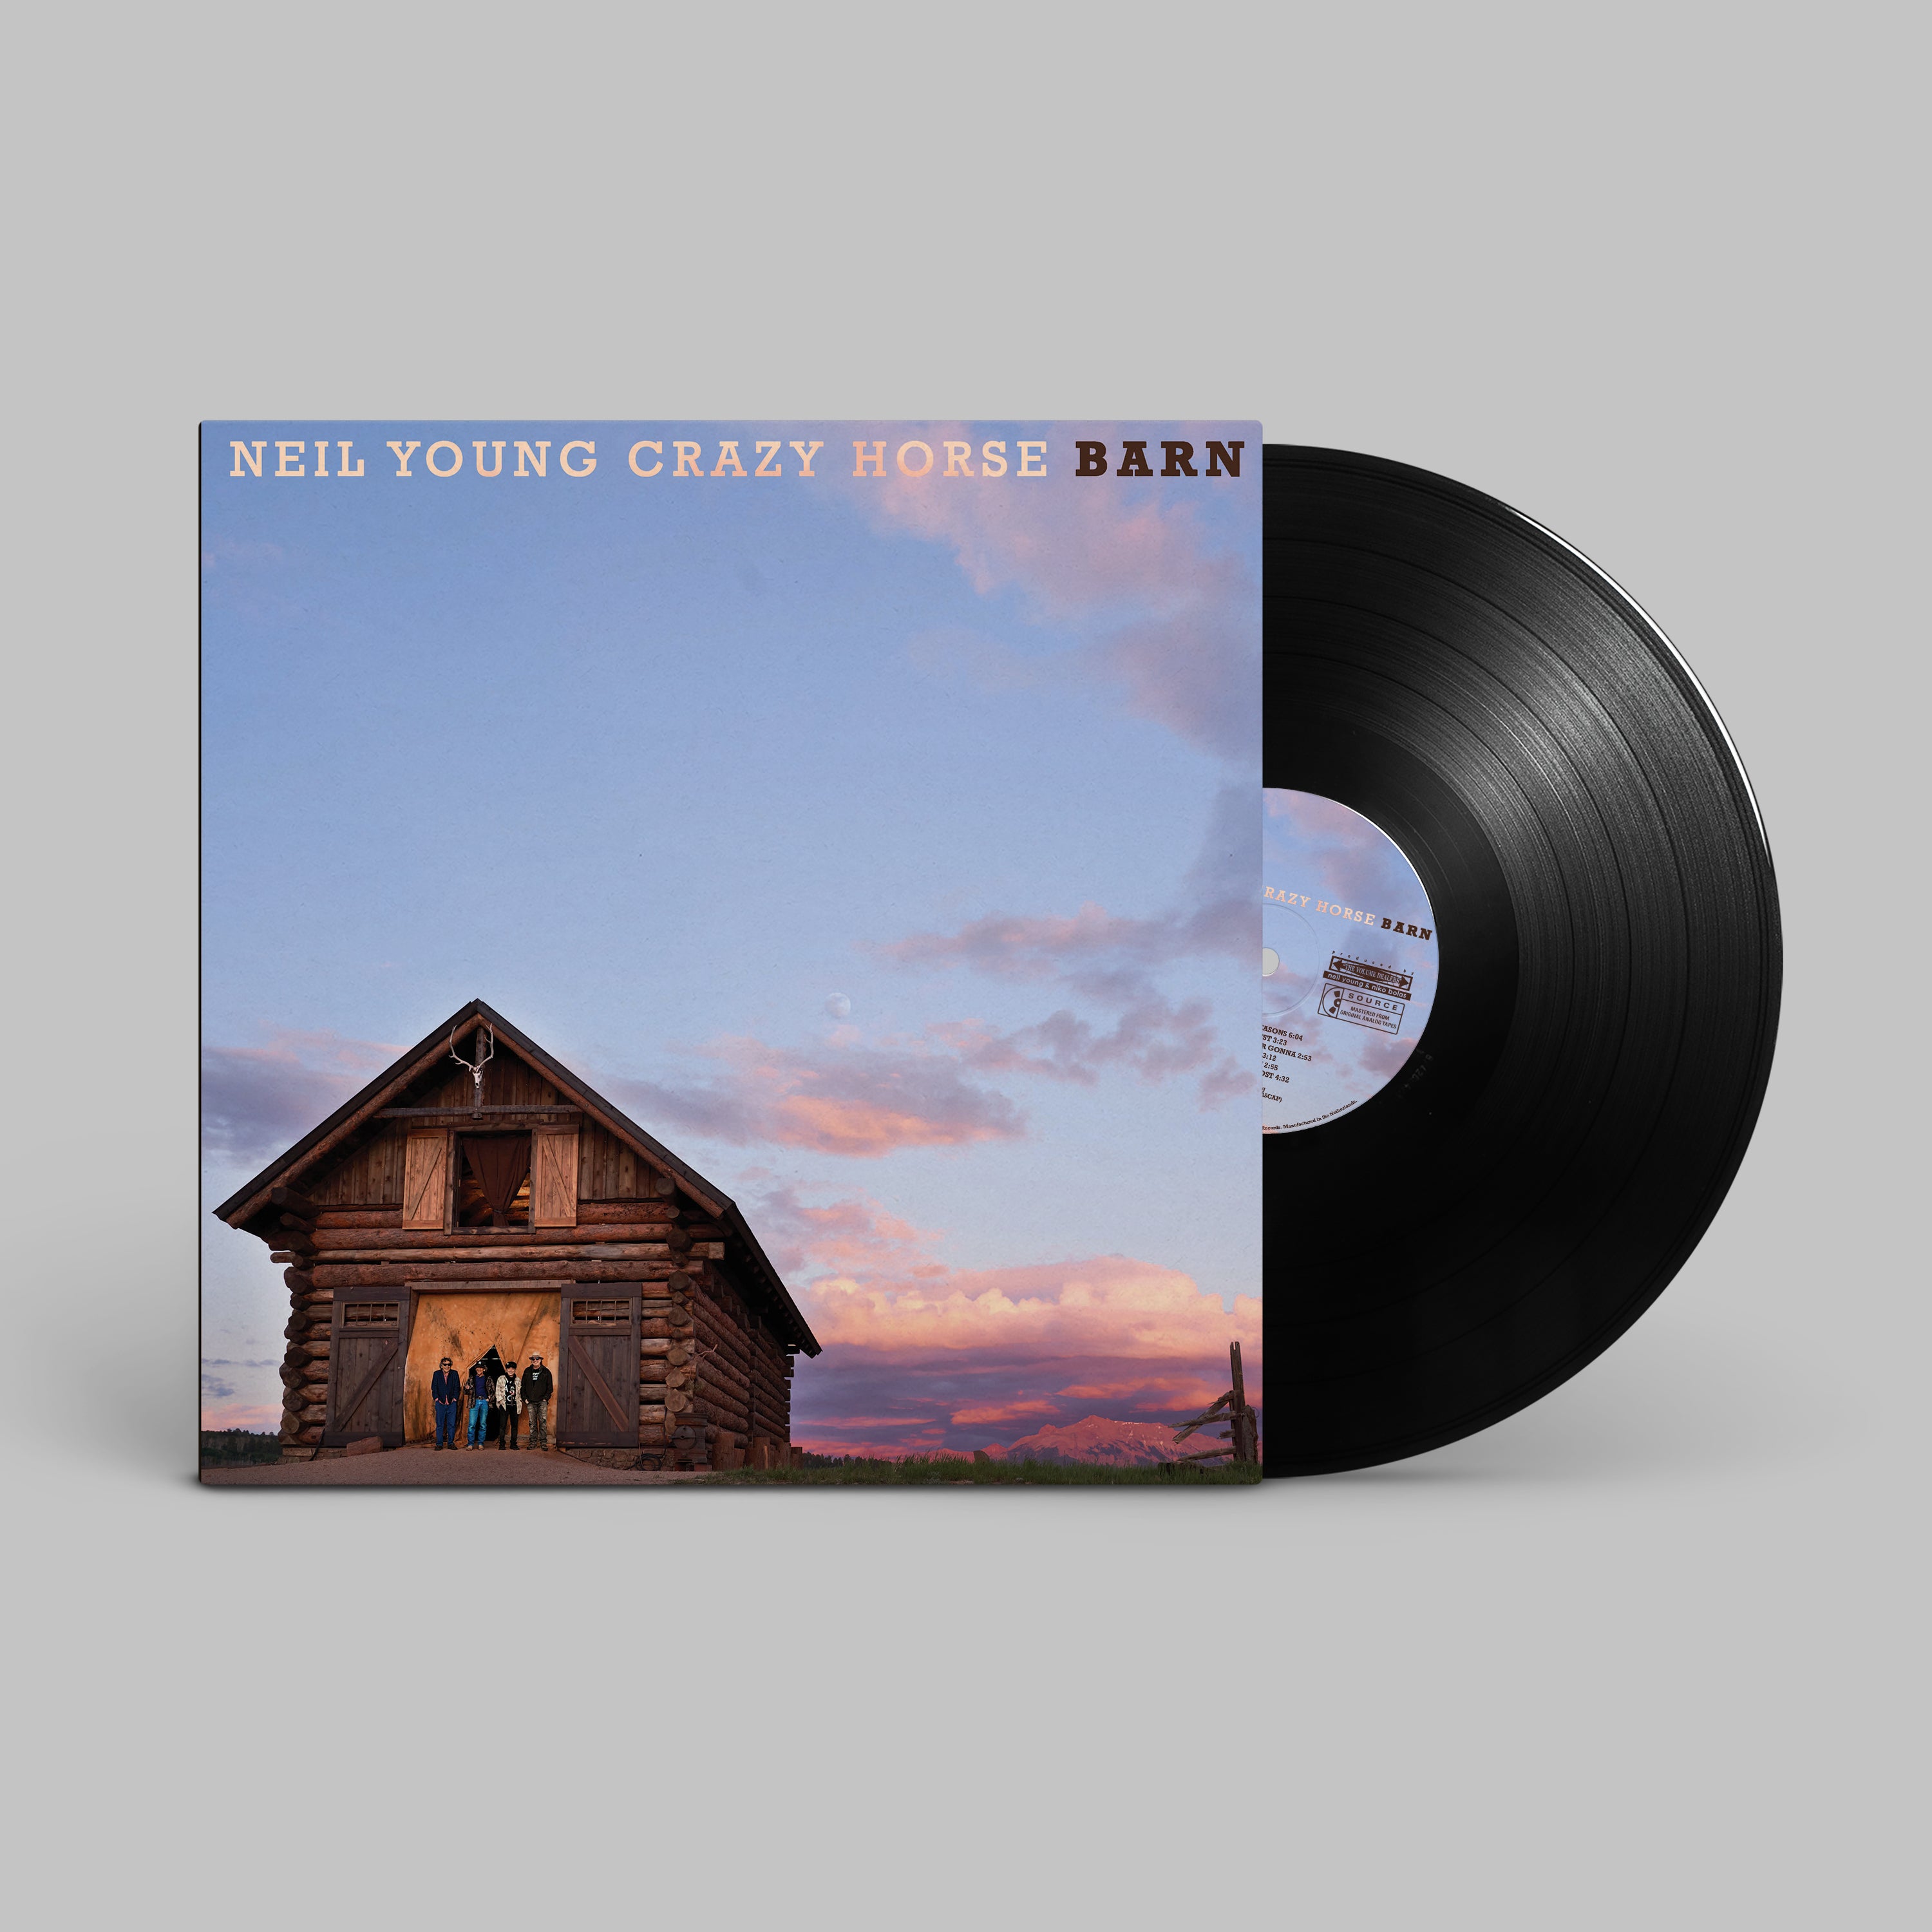 Neil Young & Crazy Horse | Barn (Indie Exclusive, Special Edition, Photo Book) | Vinyl - 0